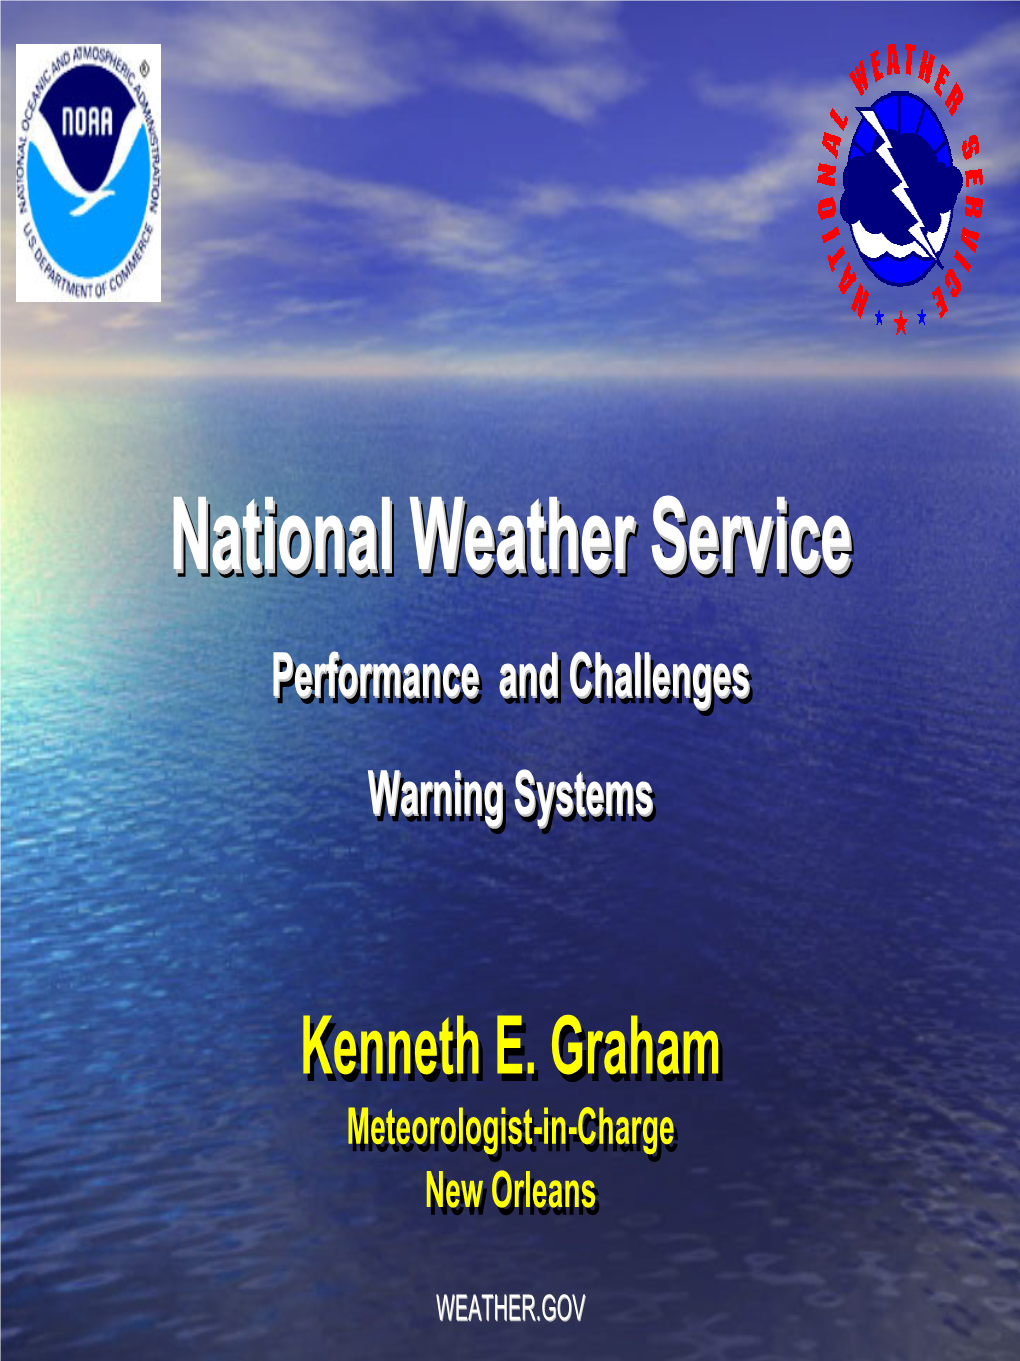 NWS Weather Forecast Offices